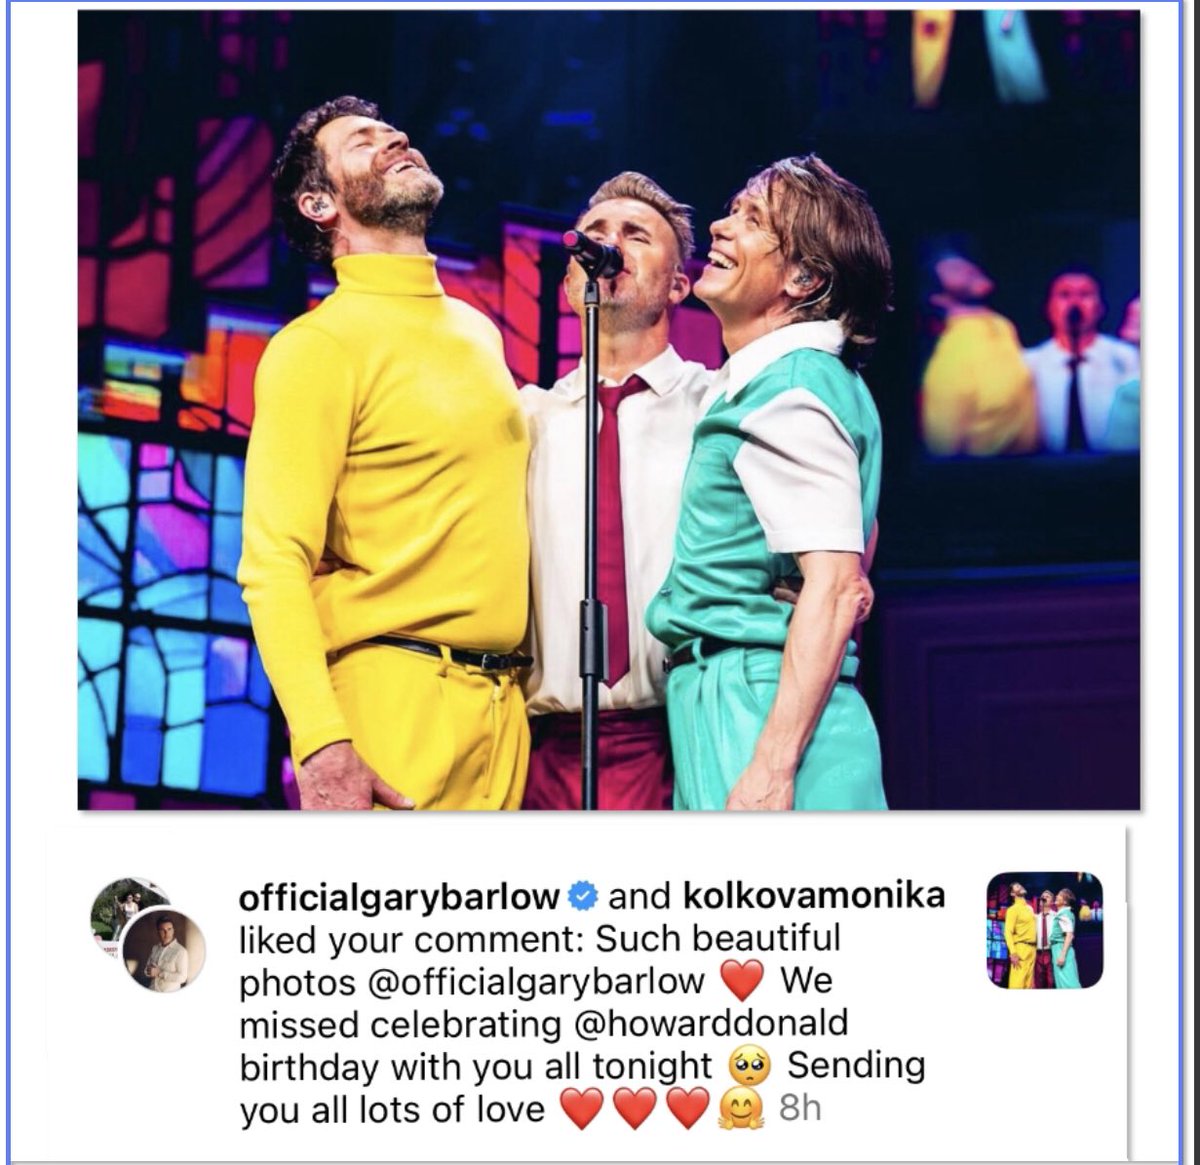 @GaryBarlow ❤️ Thank you so much for your like today. We really missed you on #Howards special birthday weekend. Just want you to know that you are a very special band and you mean the world to both Alex and me and you always will @takethat #ThisLife #sendinglove ❤️❤️❤️🤗🥁